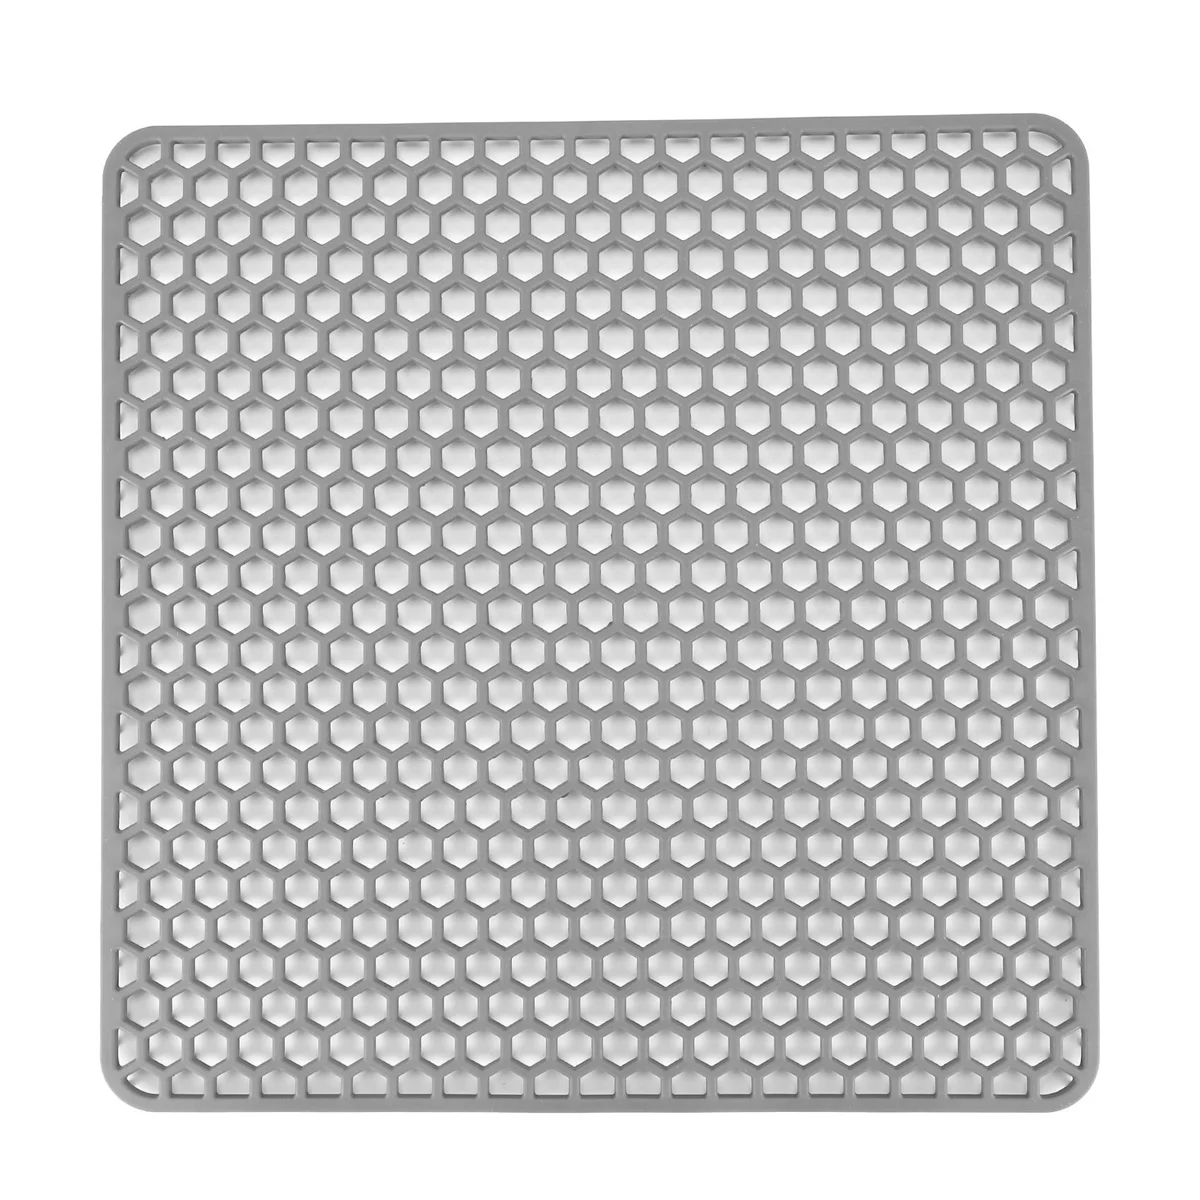 

Silicone Sink Protector Mats,Dish Drying Mat Counter Protector, for Kitchen Utensils and Dishes(Gray)